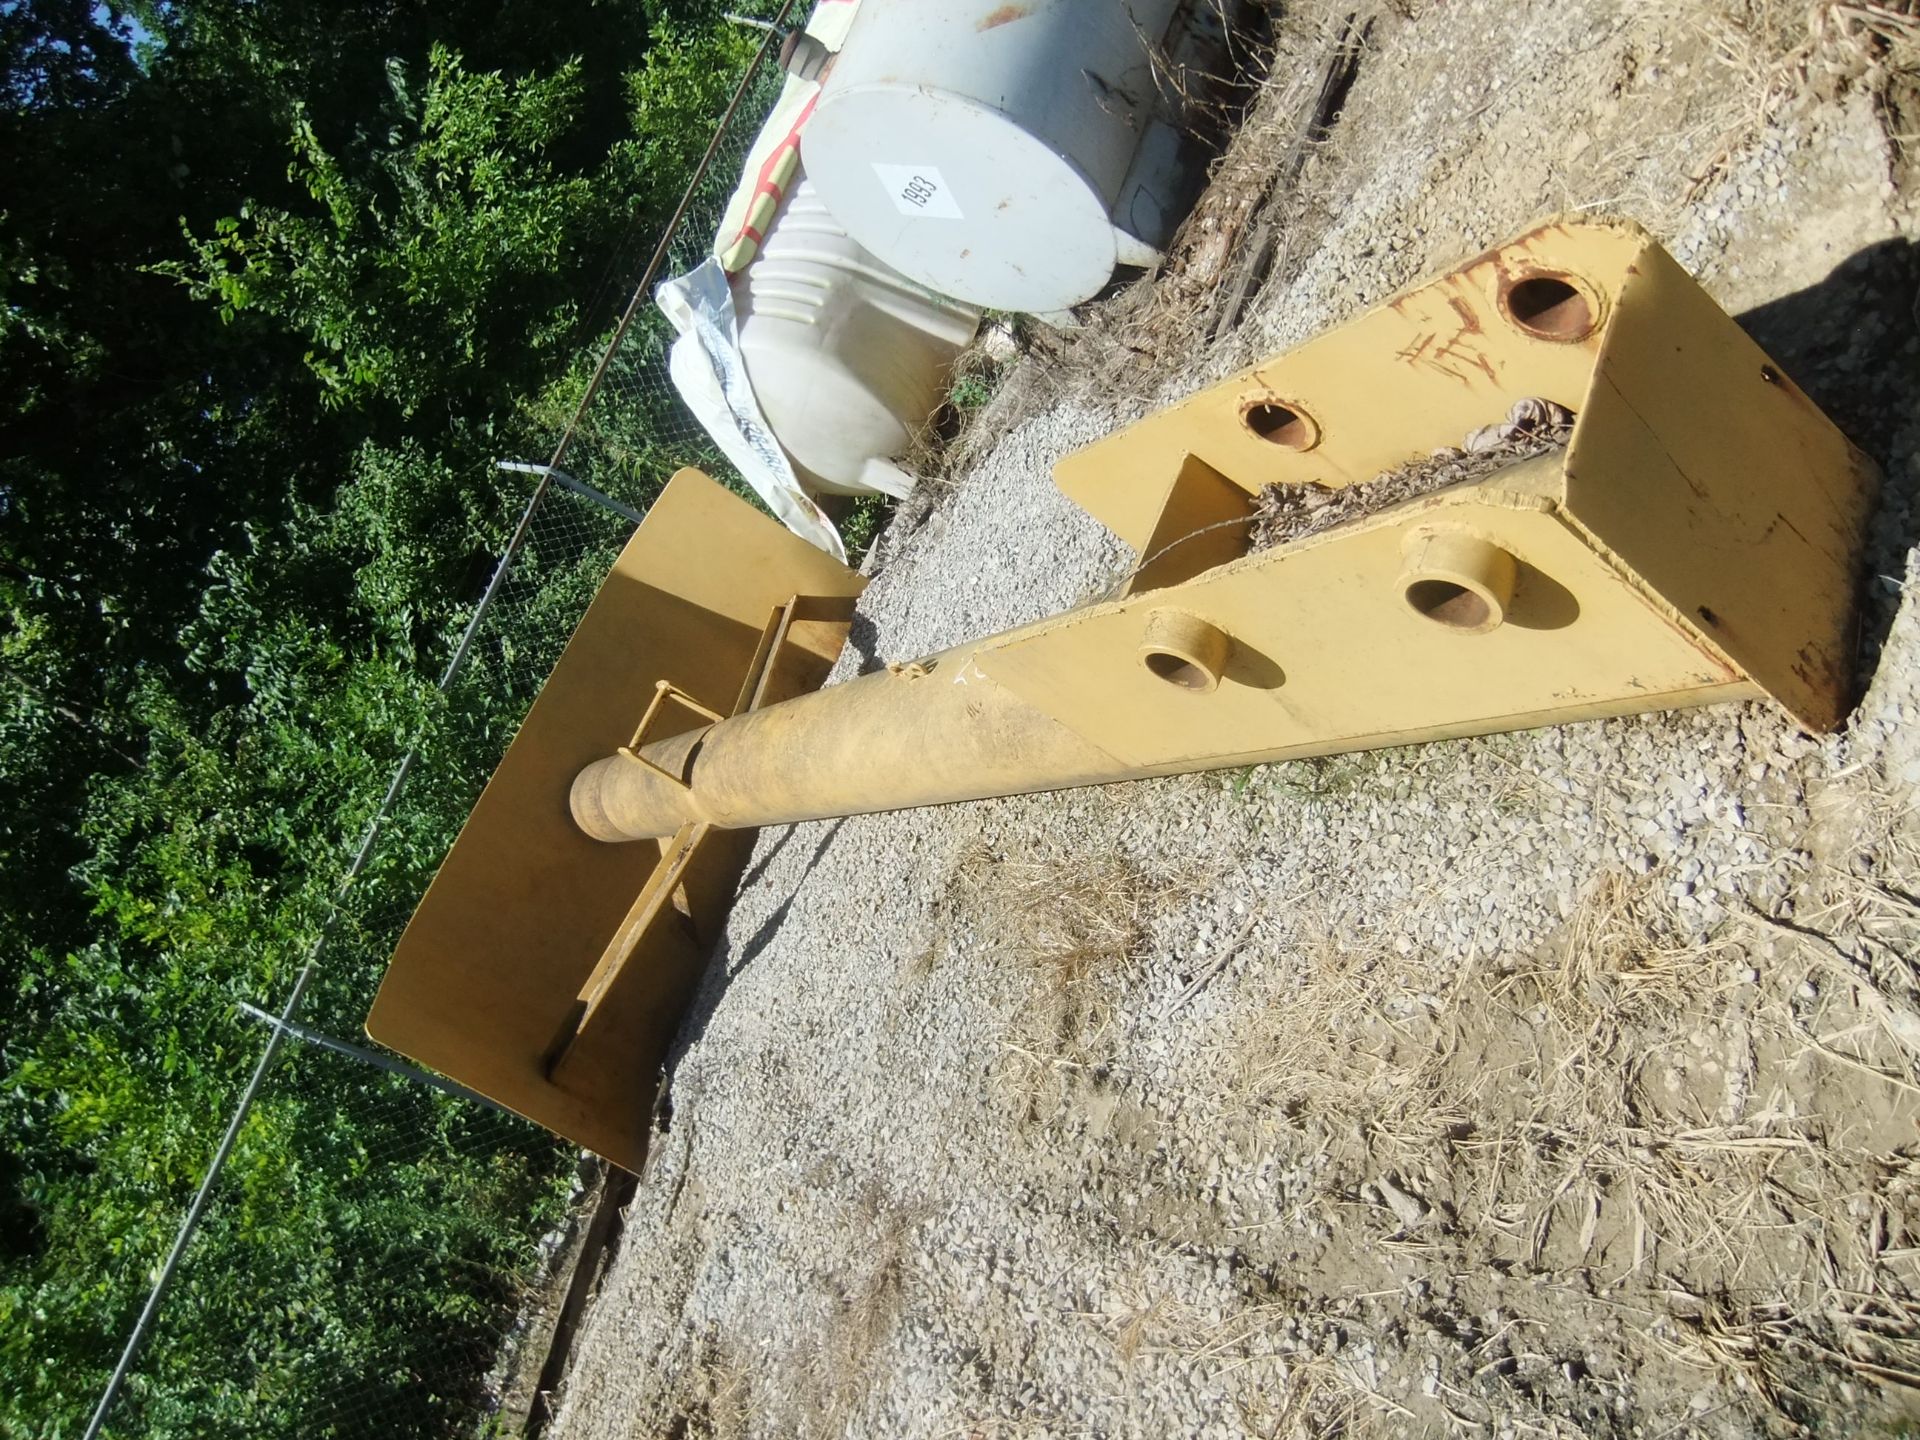 HOMADE 6' STOMPER. FITS ON 300 SIZE TRACKHOE FOR COMPACTING